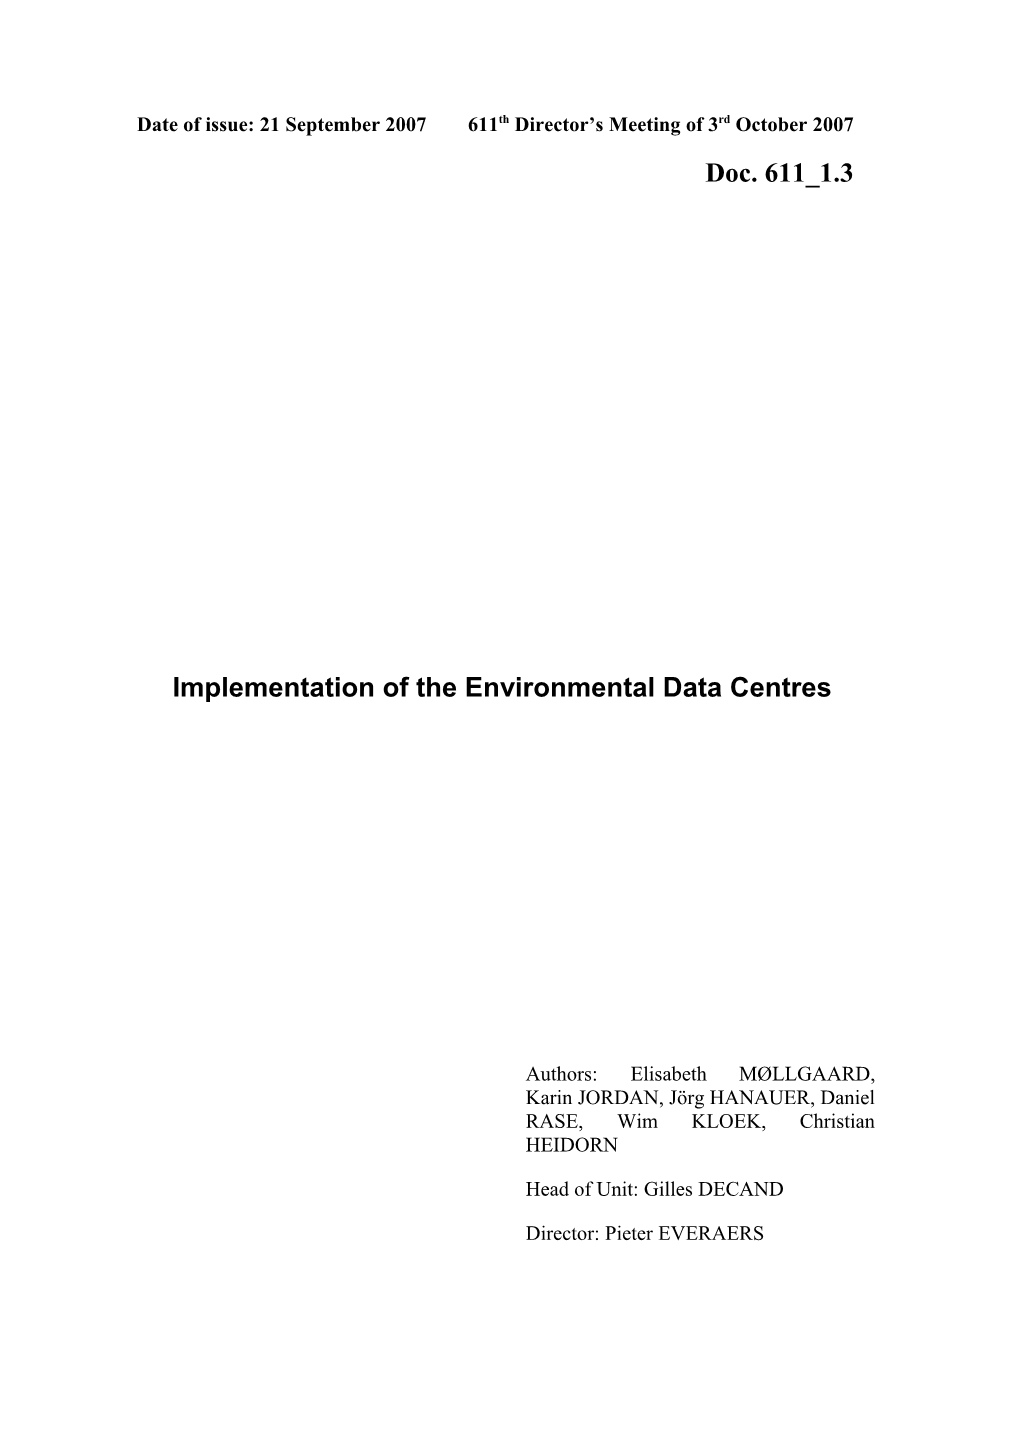 Implementation of the Environmental Data Centres